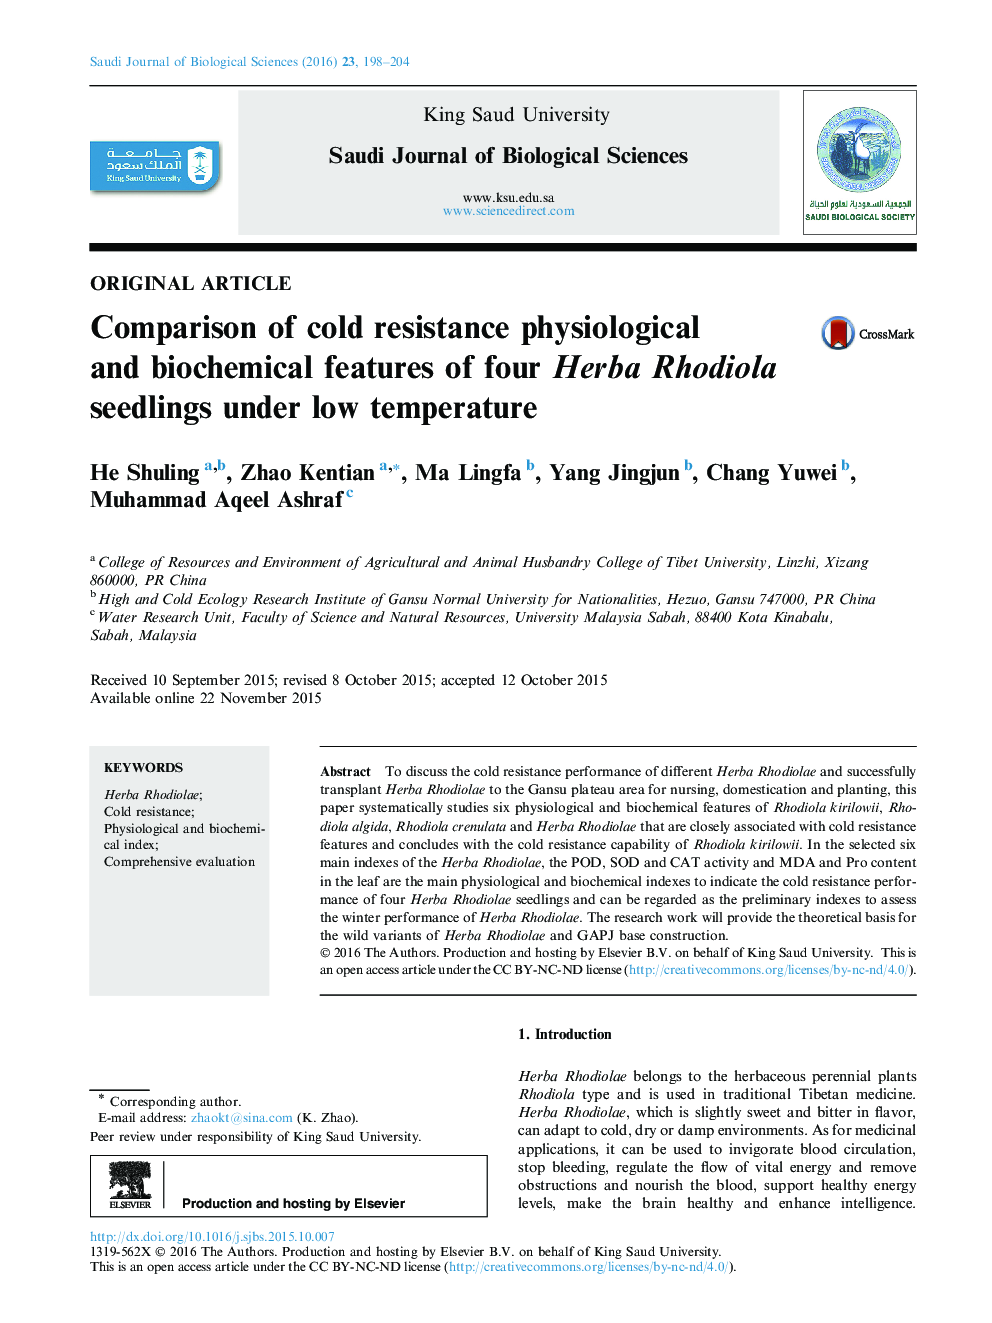 Comparison of cold resistance physiological and biochemical features of four Herba Rhodiola seedlings under low temperature